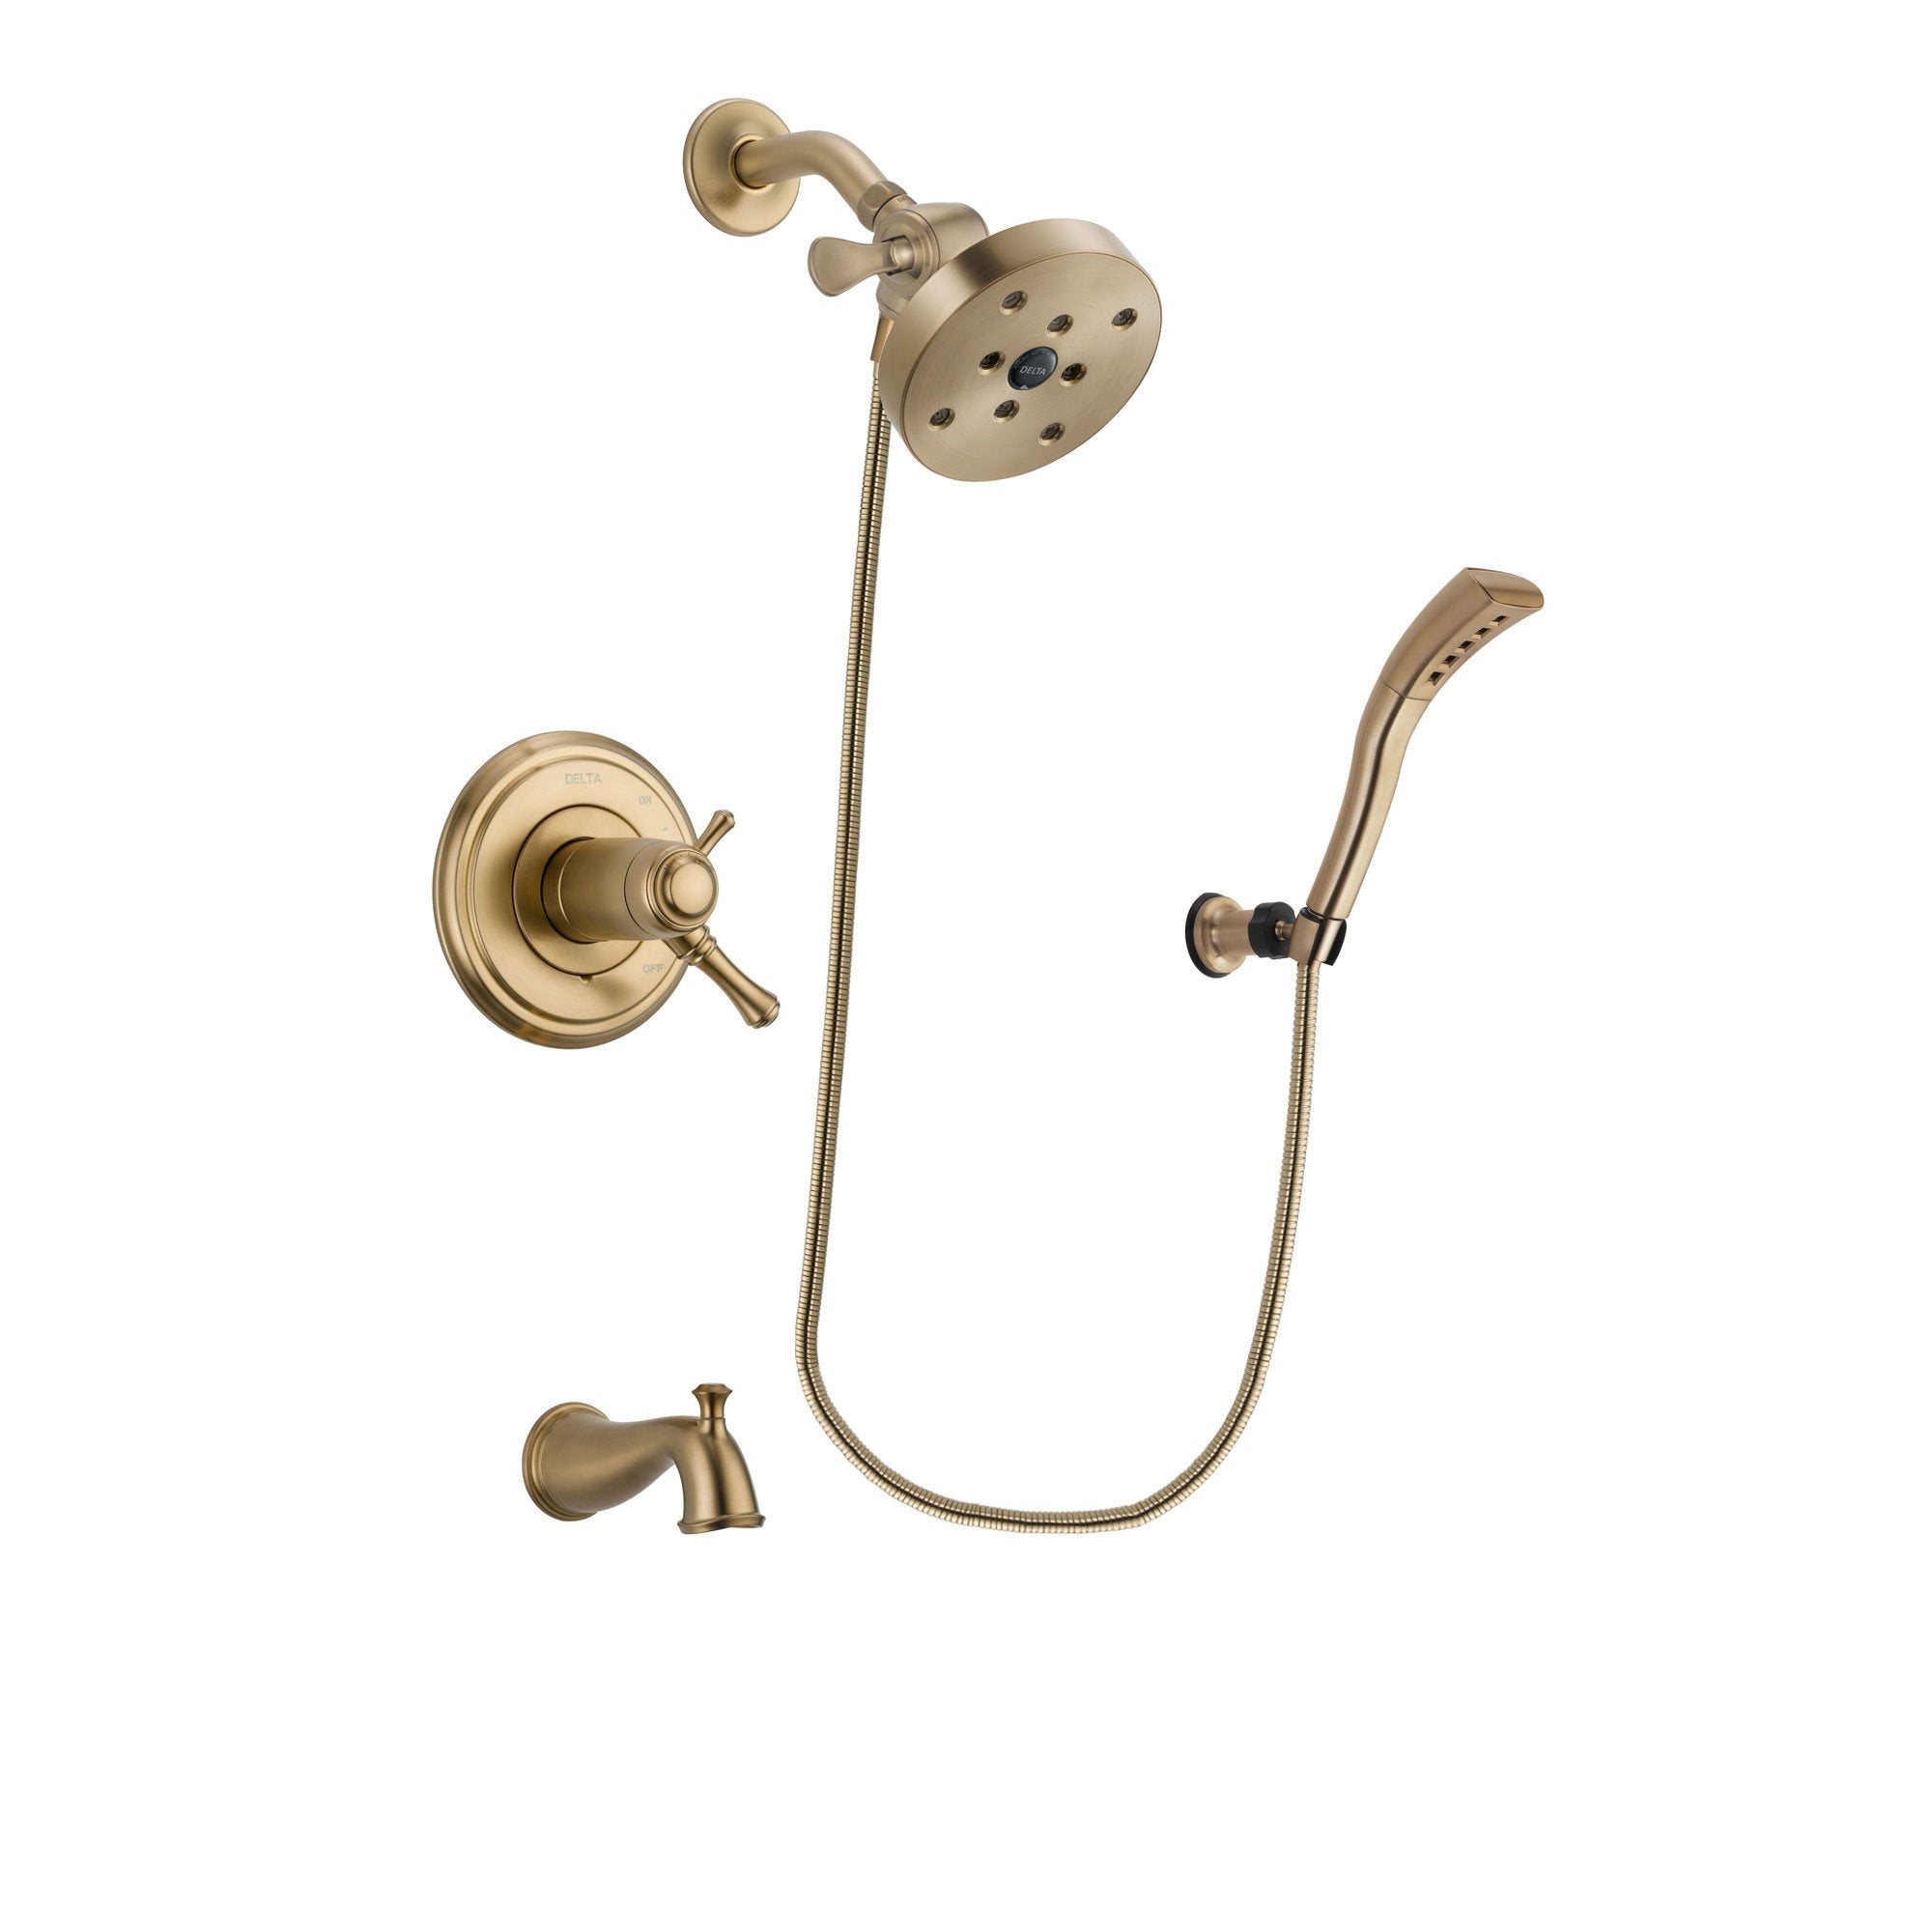 Delta Cassidy Champagne Bronze Finish Thermostatic Tub and Shower Faucet System Package with 5-1/2 inch Showerhead and Modern Wall Mount Personal Handheld Shower Spray Includes Rough-in Valve and Tub Spout DSP3713V